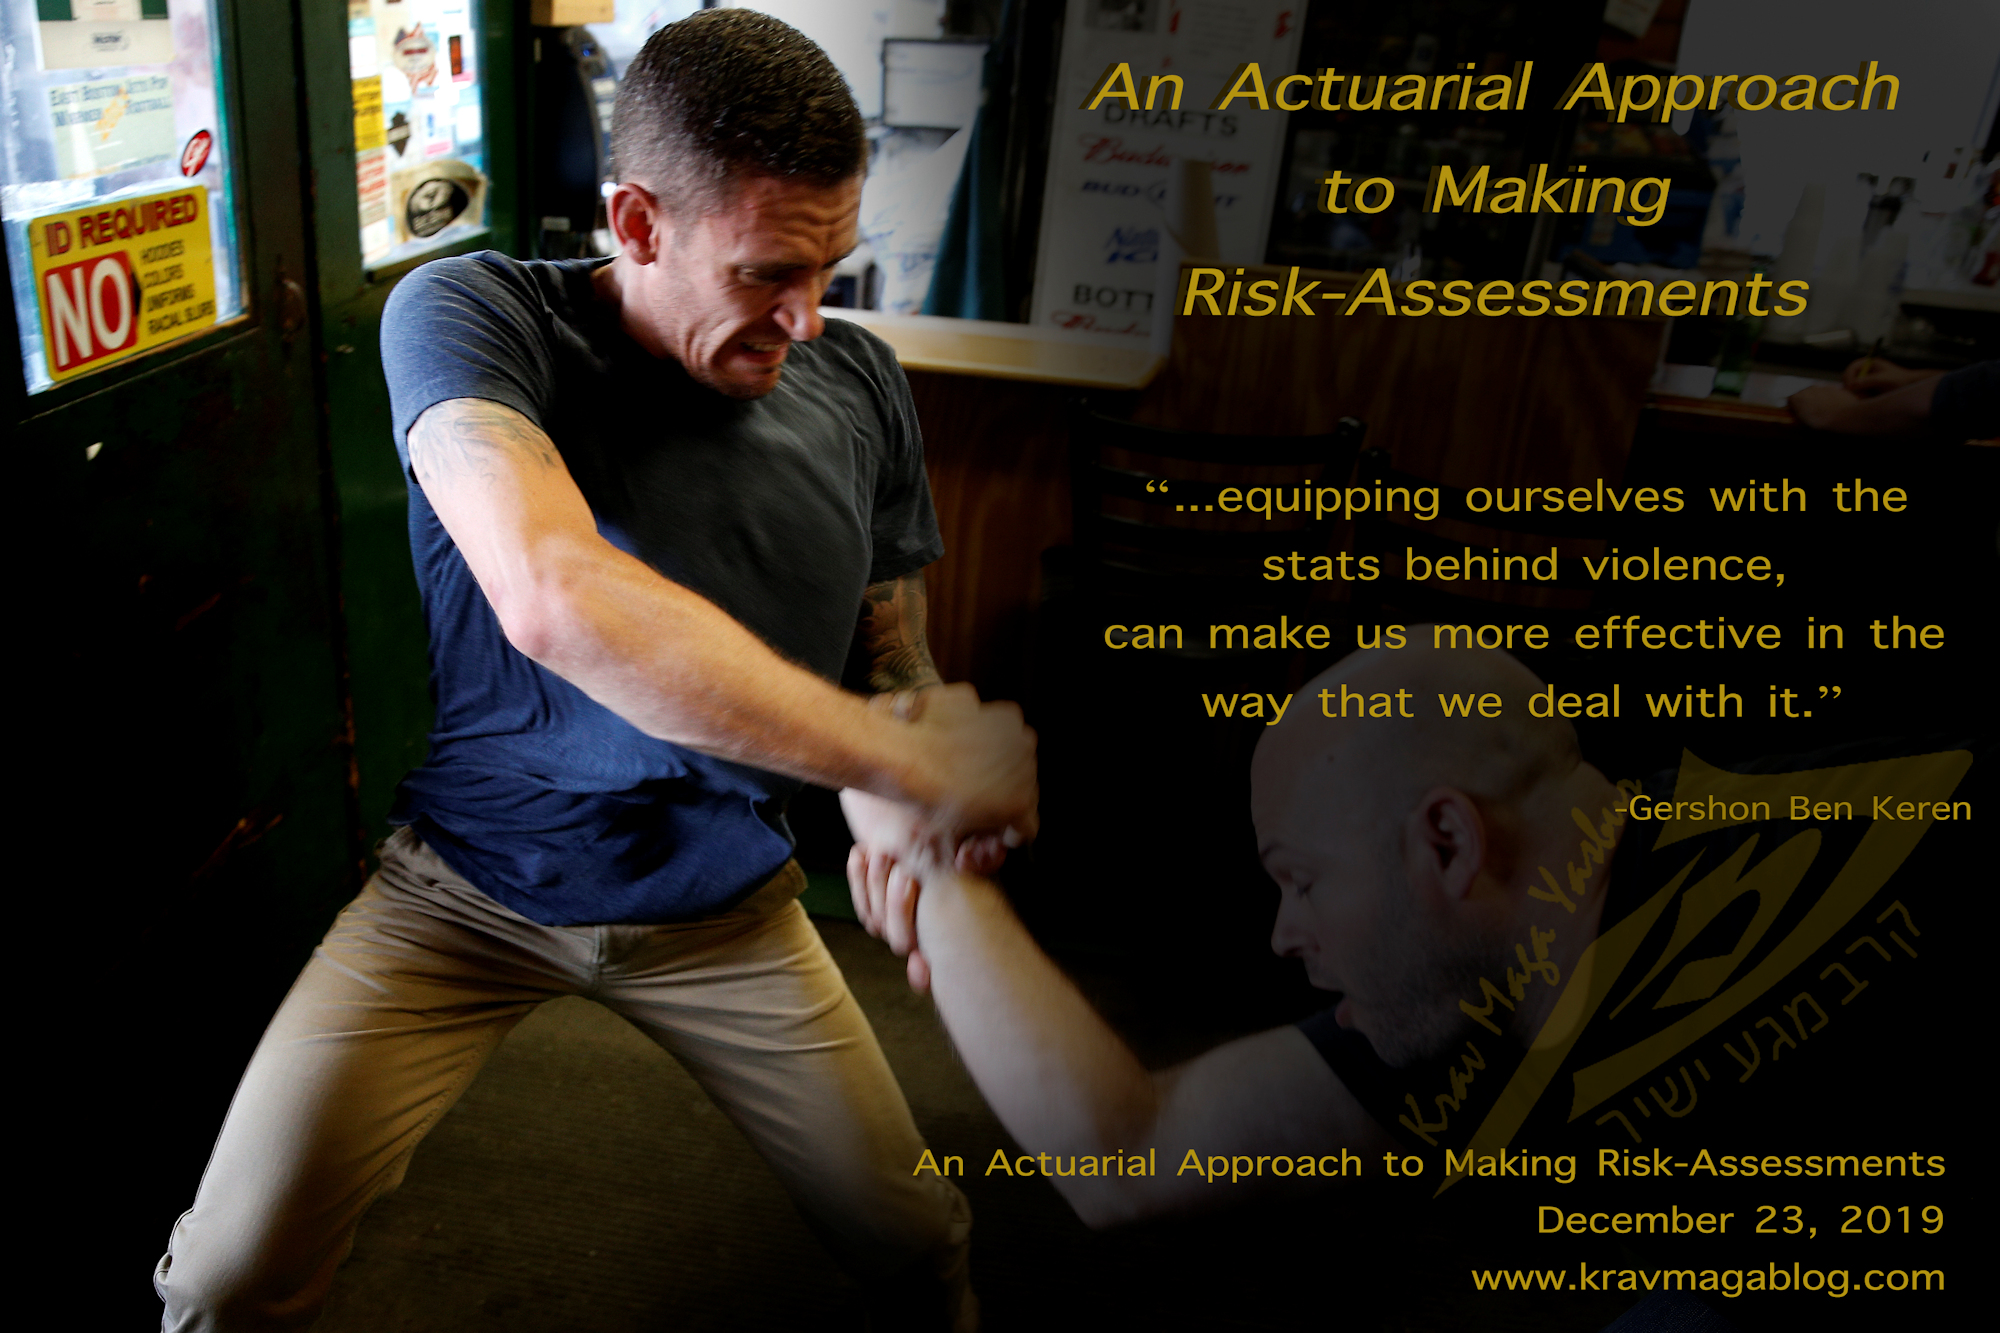 Blog About An Actuarial Approach to Making Risk Assessments